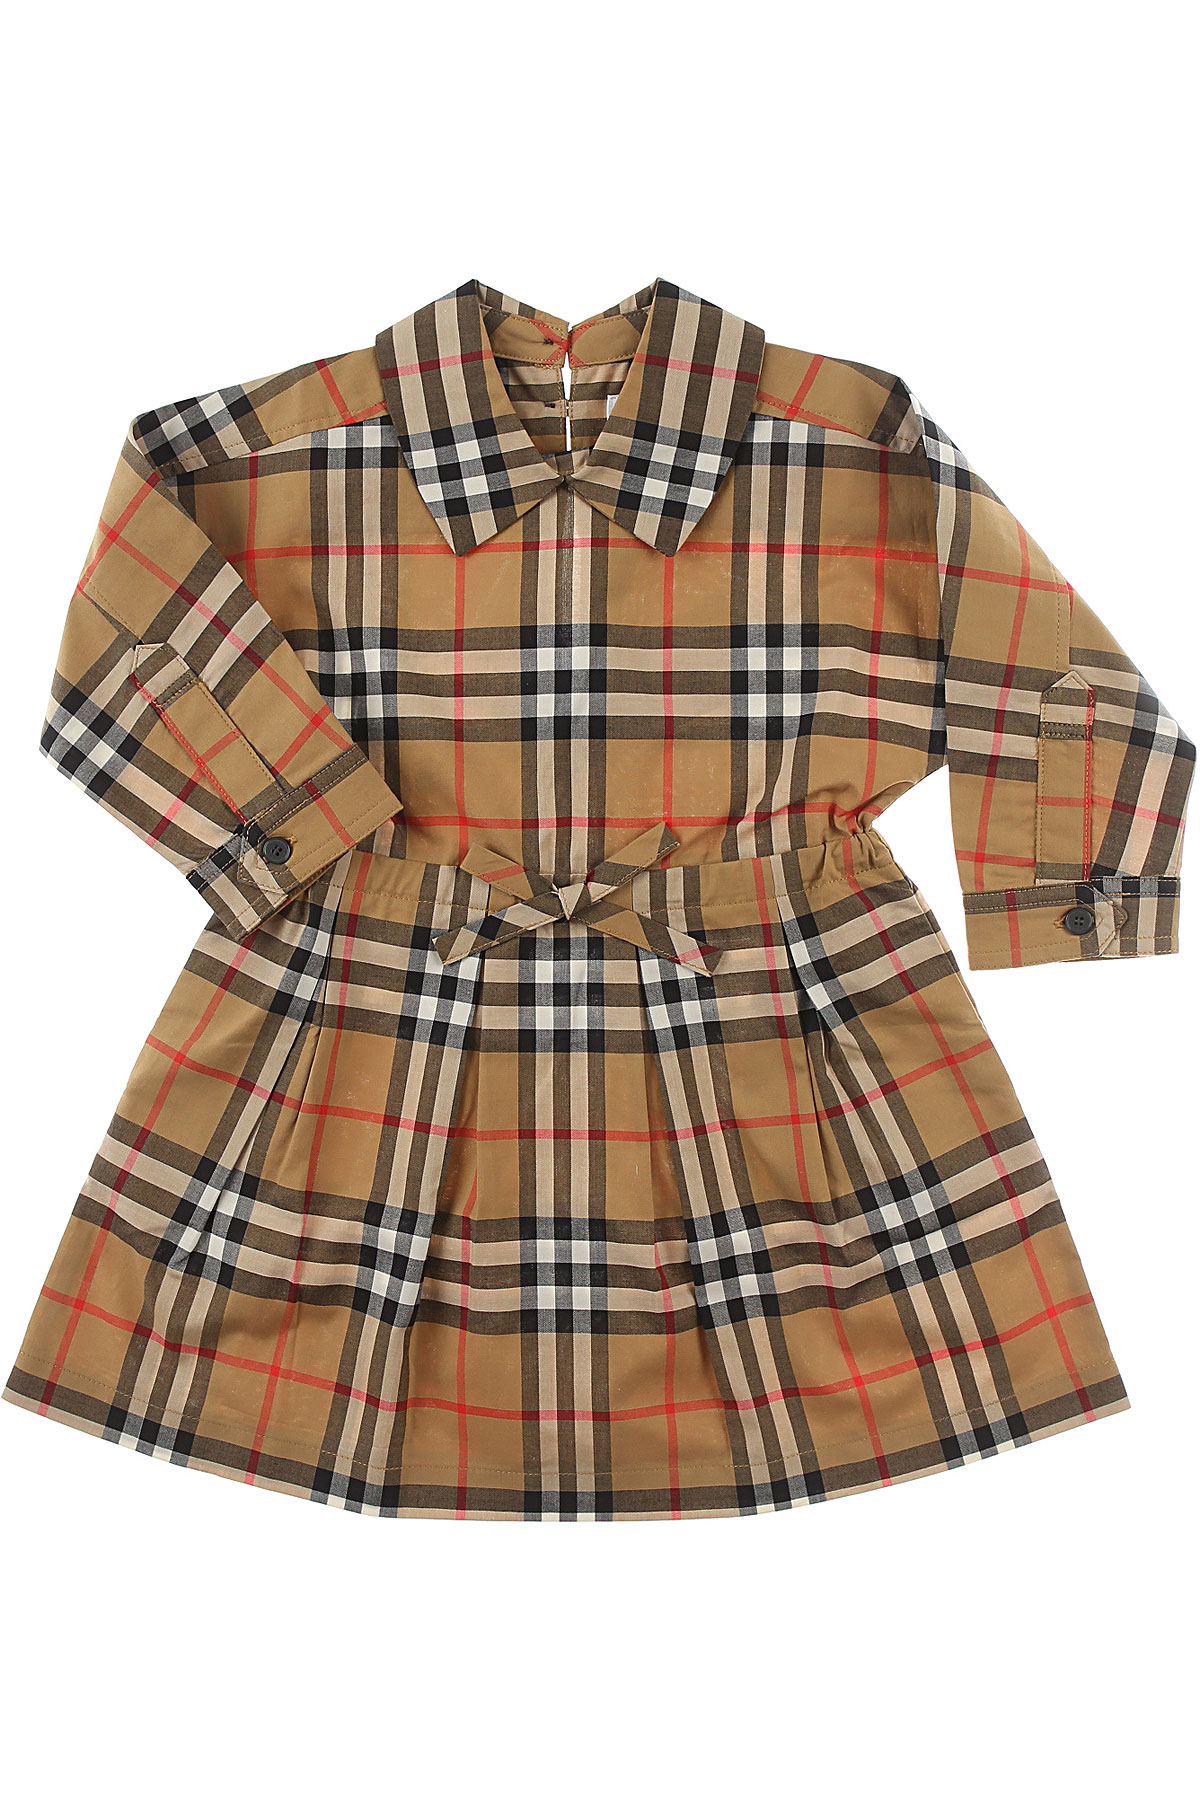 burberry baby sale outlet